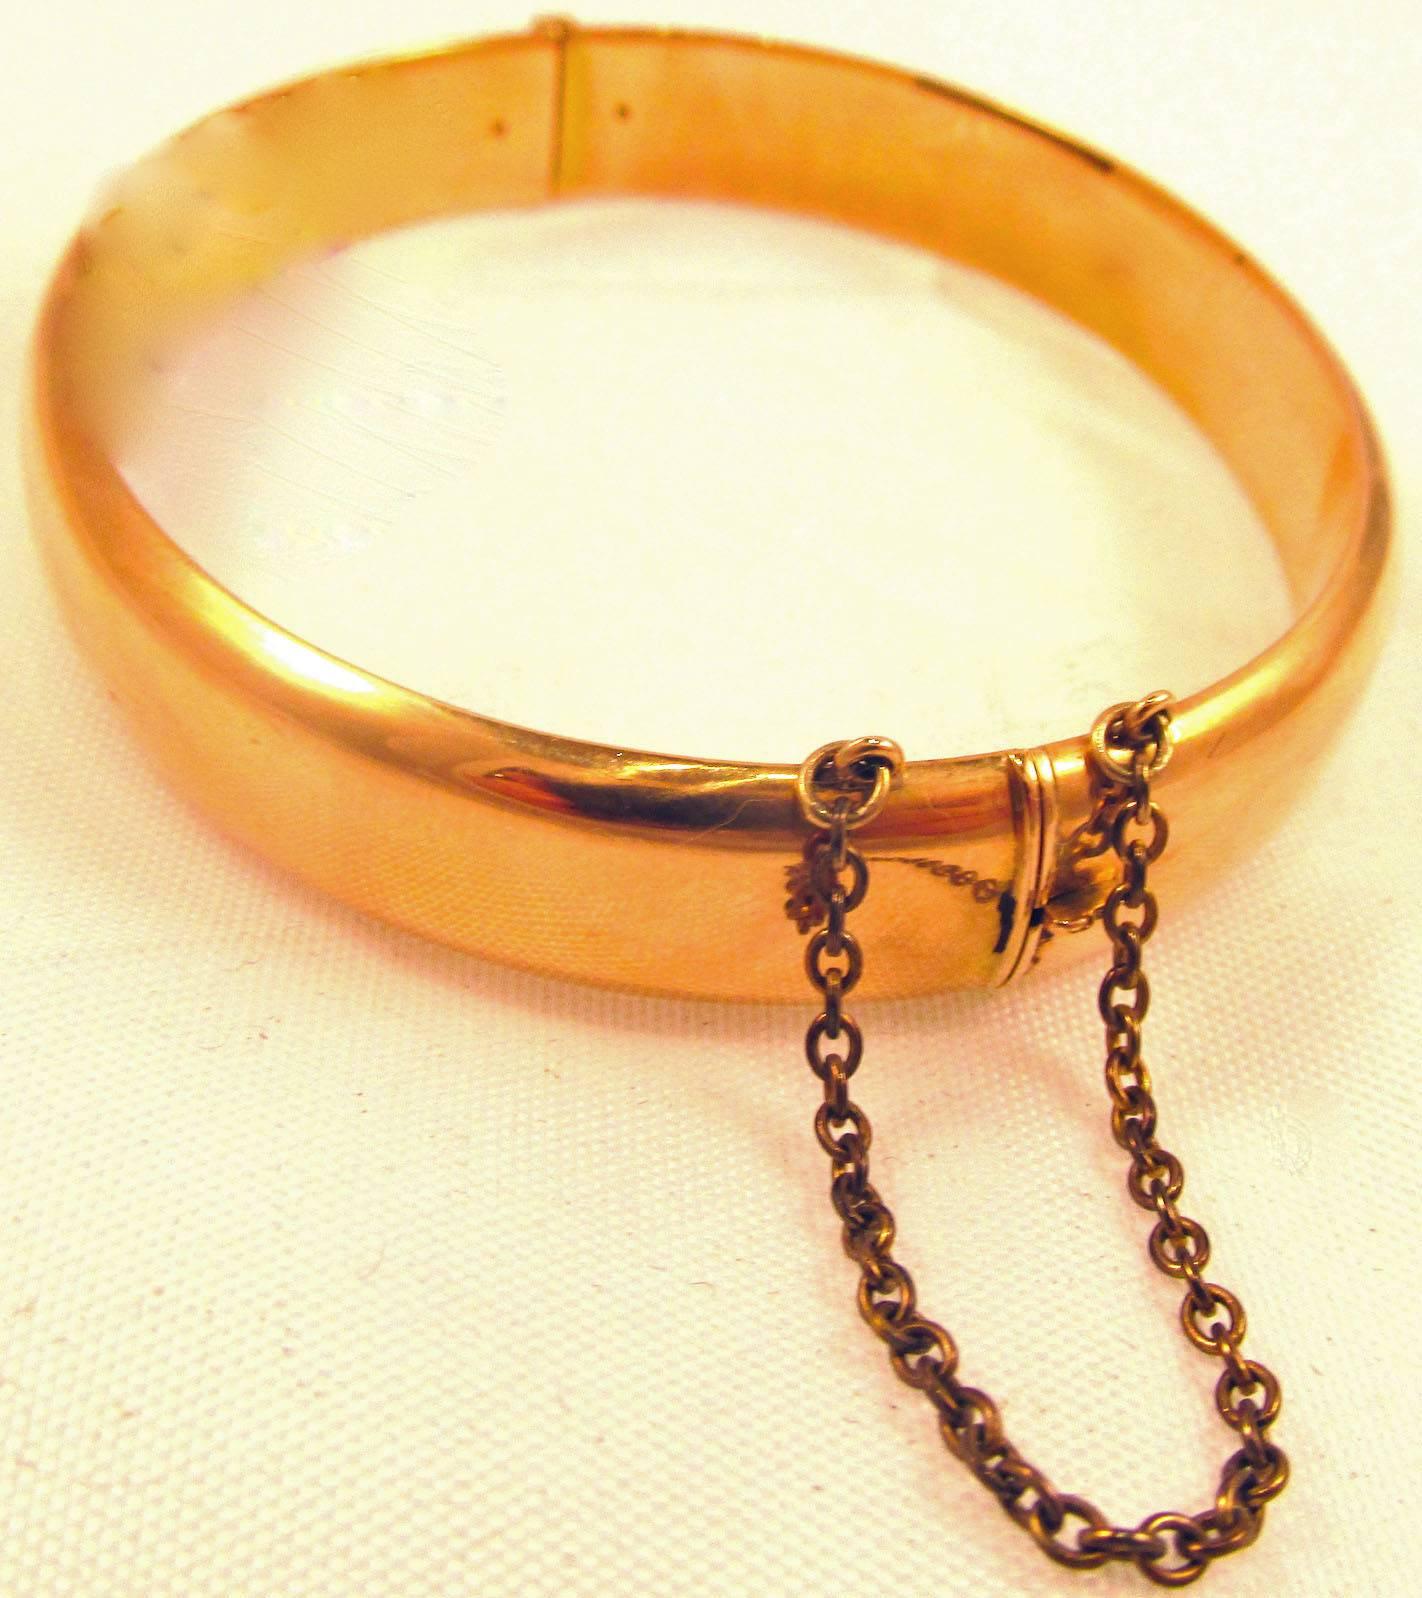 Lovely early 20th century gold bangle bracelet marked 15K and made in England c. 1920. The bracelet has a safety chain and measures 3/8